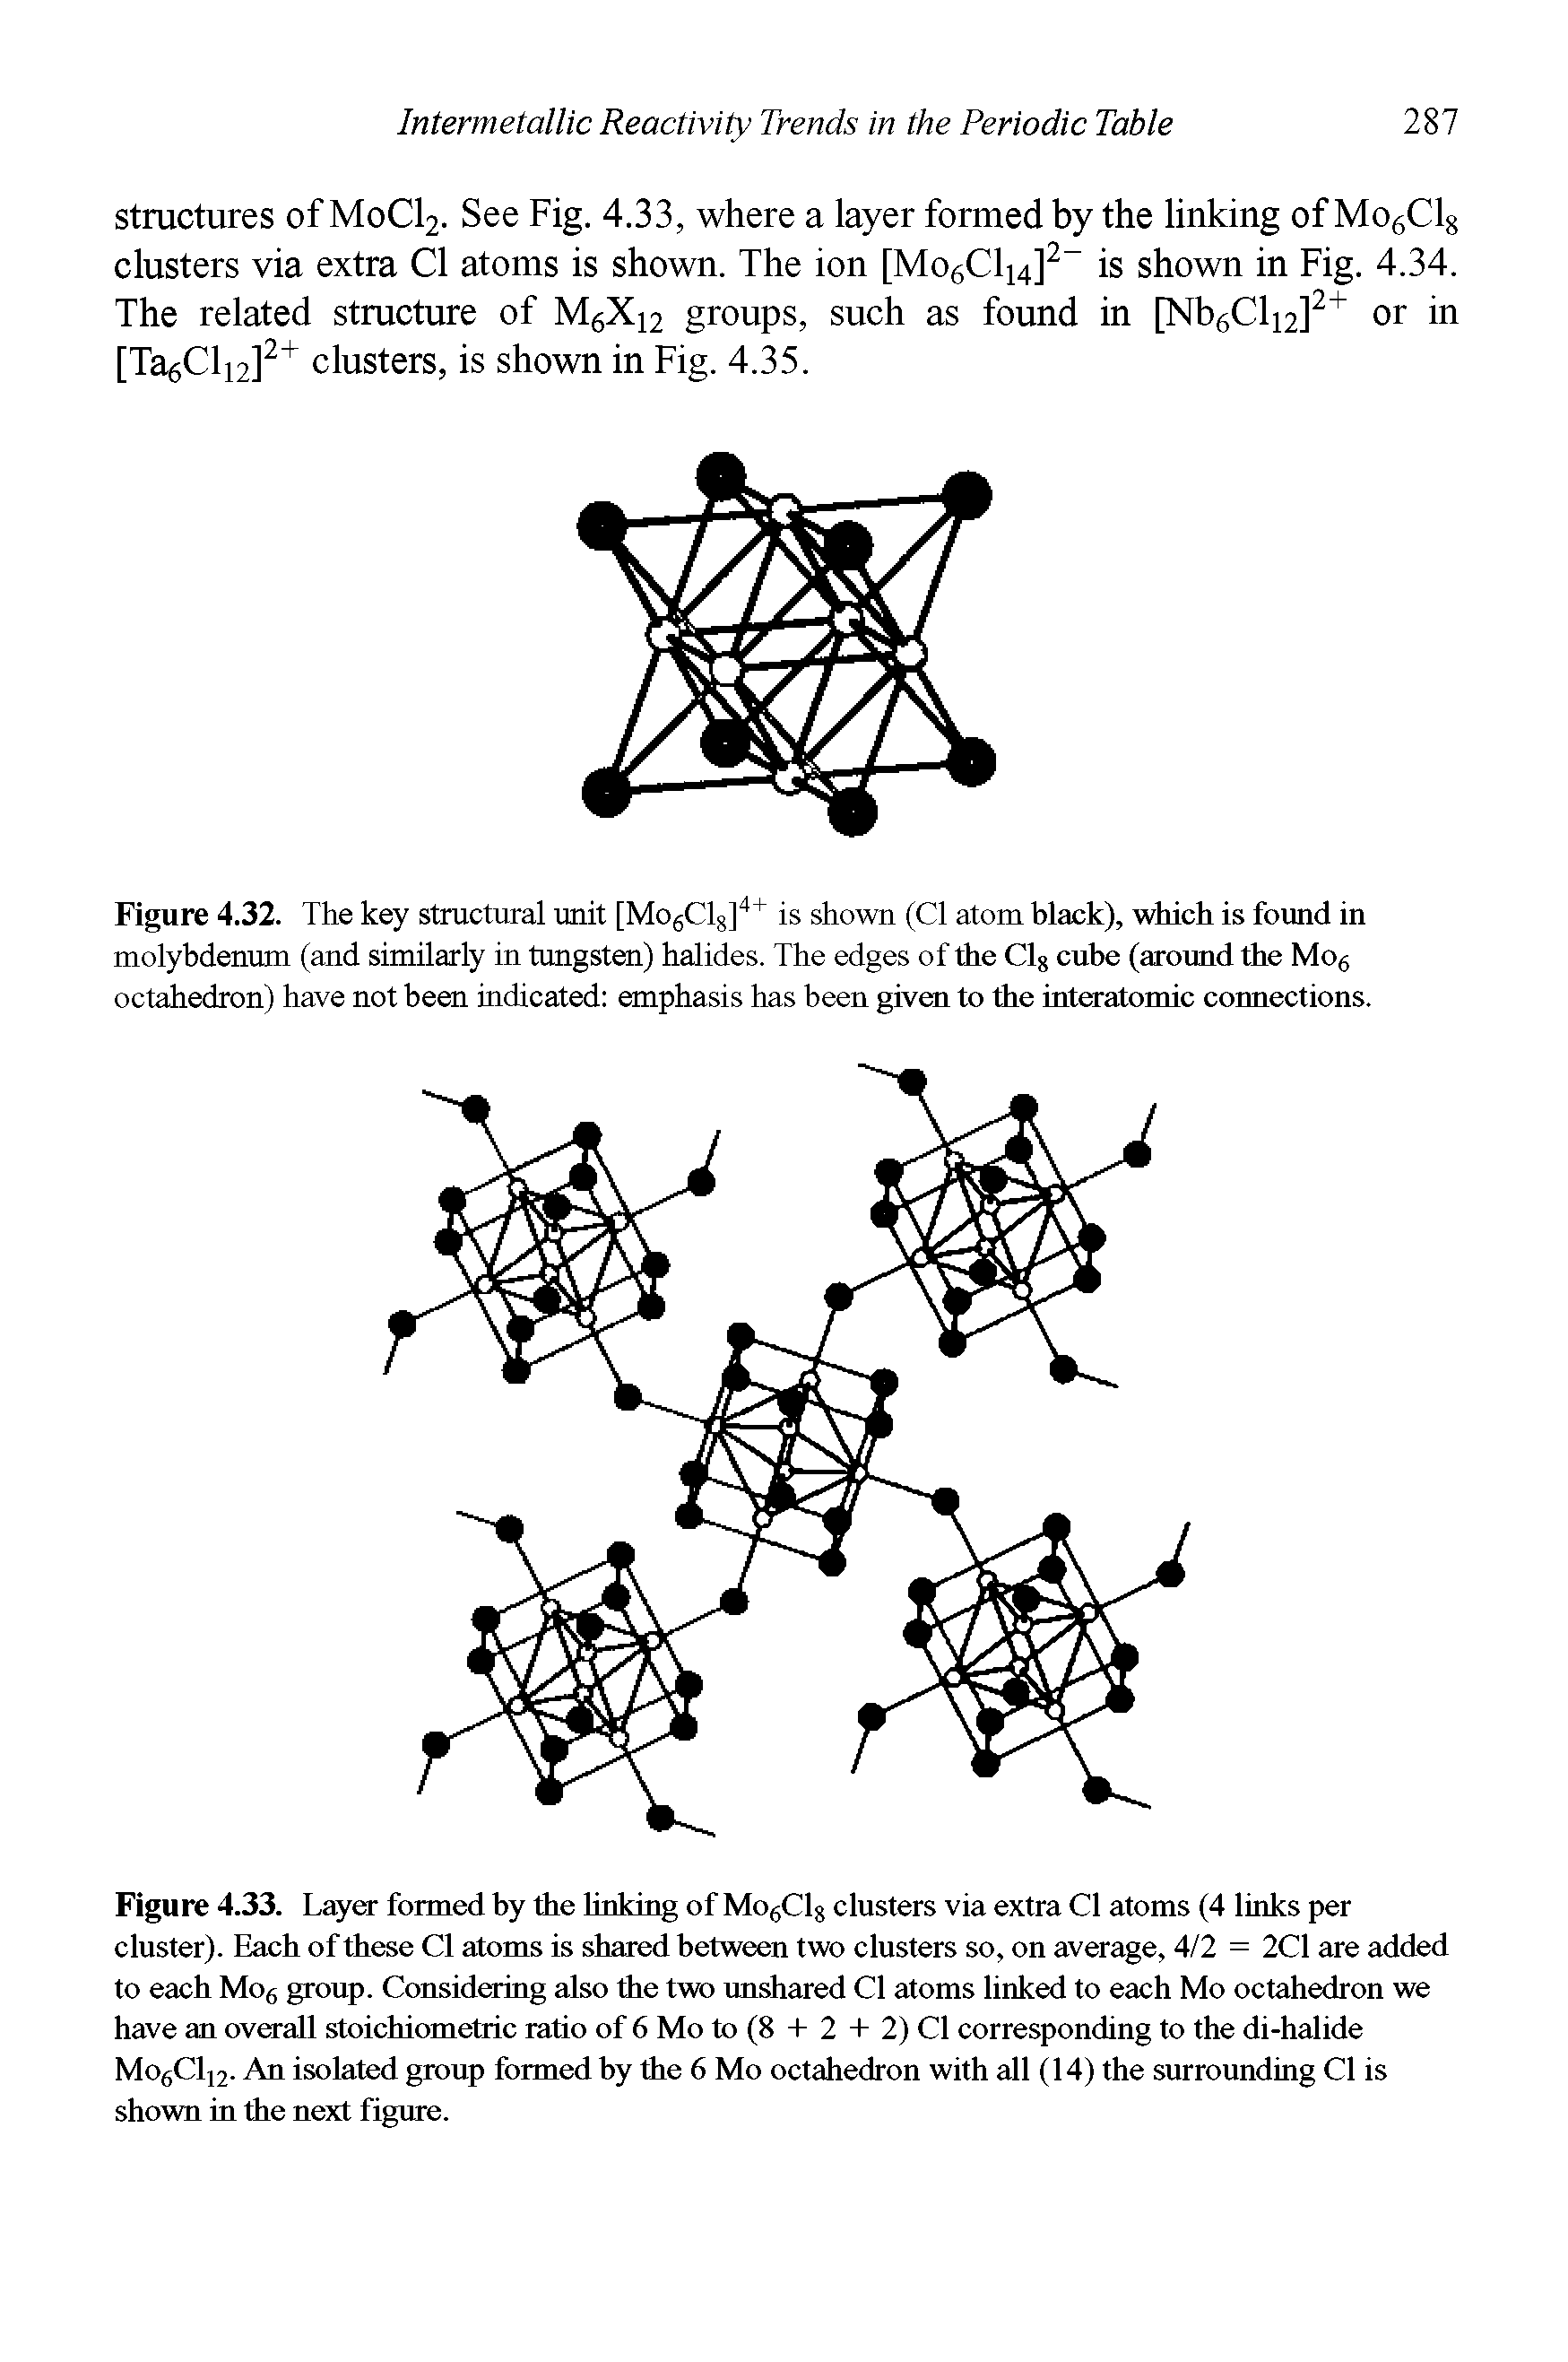 Figure 4.33. Layer formed by the linking of Mo6C18 clusters via extra Cl atoms (4 links per cluster). Each of these Cl atoms is shared between two clusters so, on average, 4/2 = 2C1 are added to each Mo6 group. Considering also the two unshared Cl atoms linked to each Mo octahedron we have an overall stoichiometric ratio of 6 Mo to (8 + 2 + 2) Cl corresponding to the di-halide Mo6C112. An isolated group formed by the 6 Mo octahedron with all (14) the surrounding Cl is shown in the next figure.